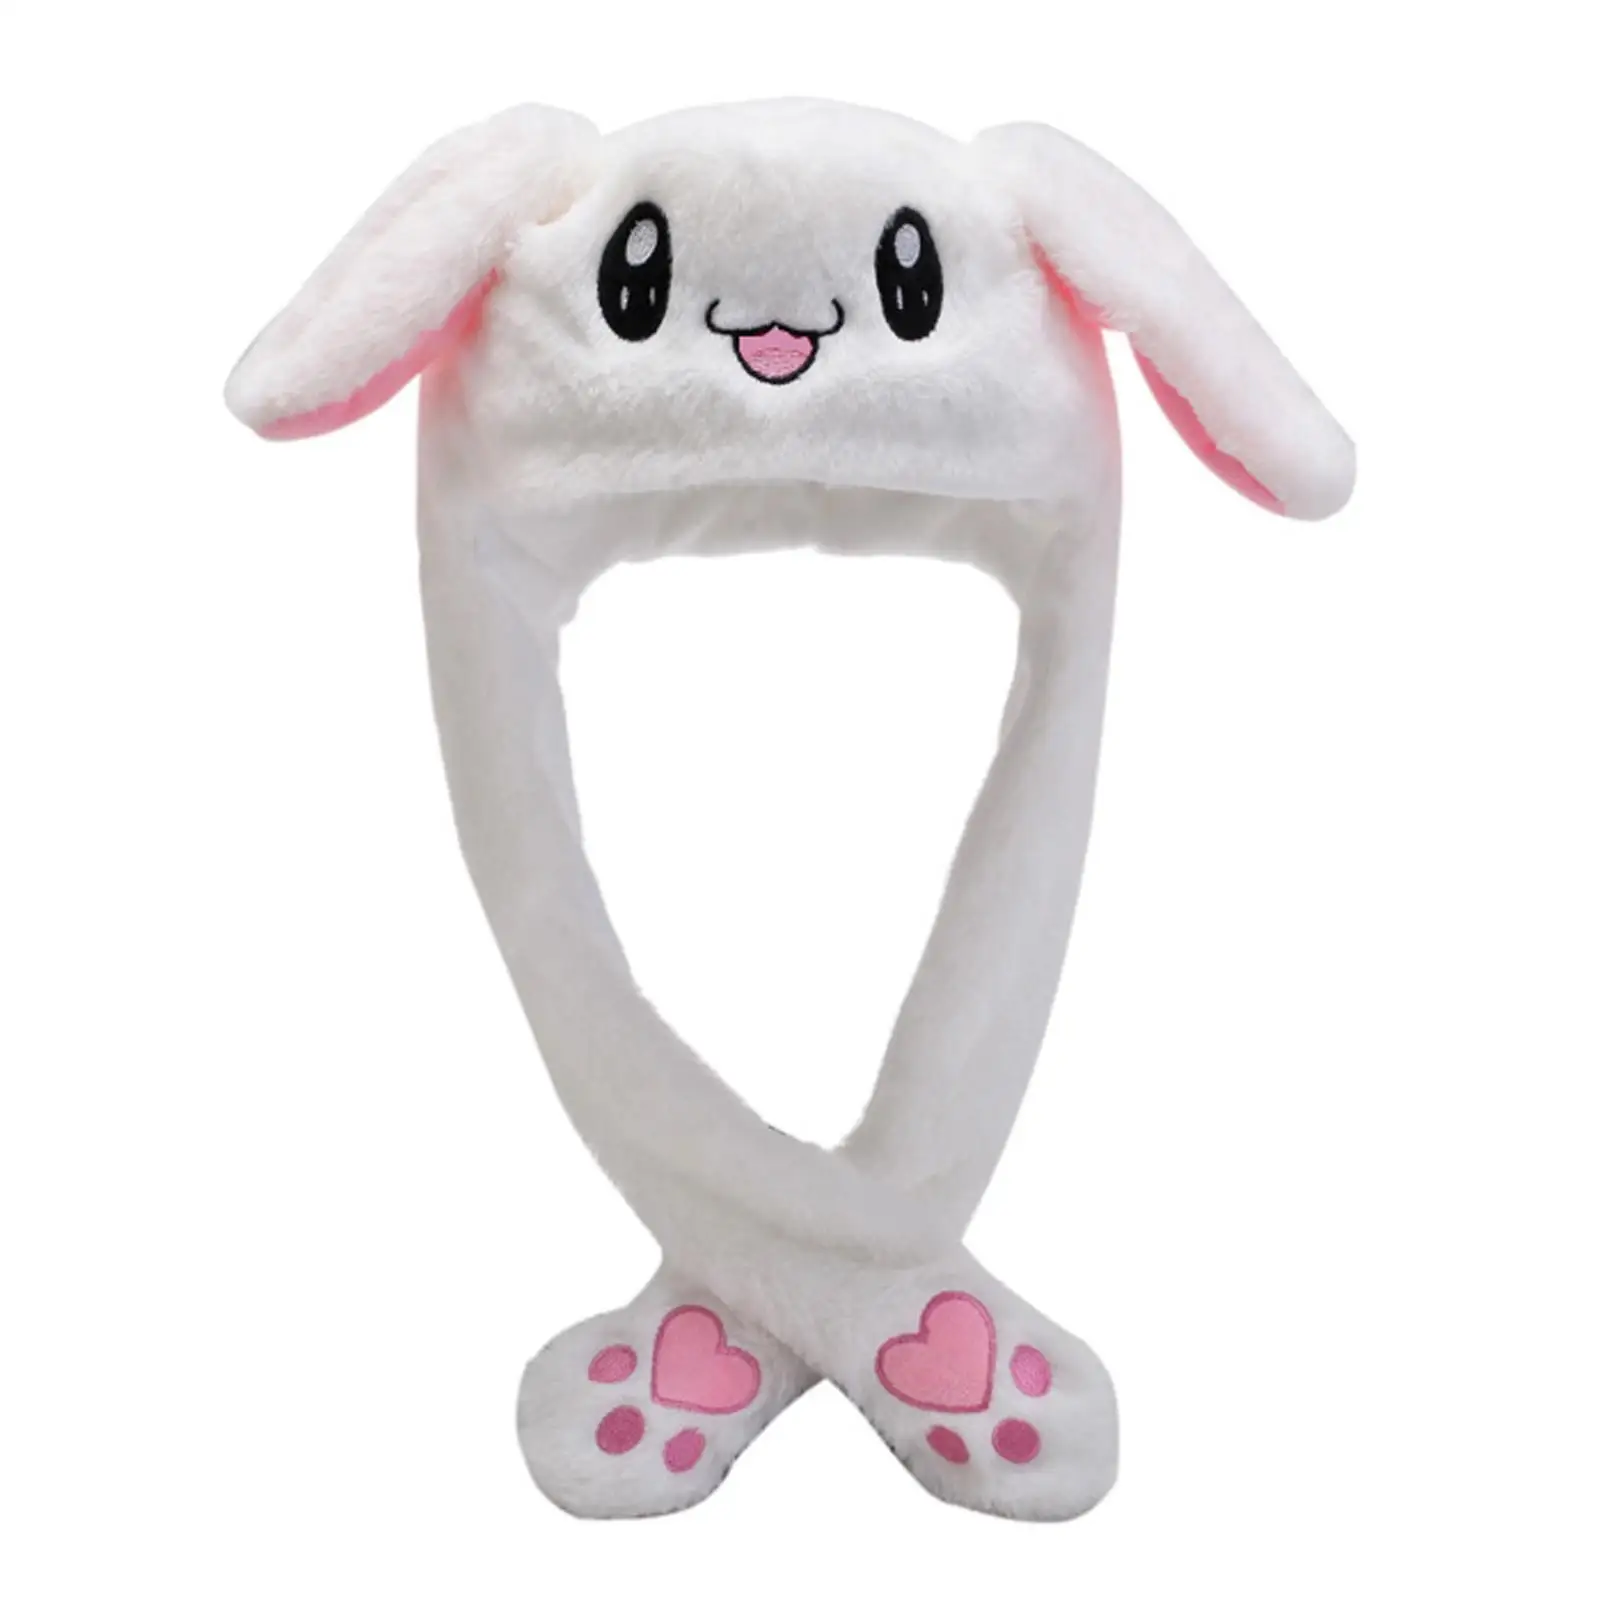 Cute Ear Moving Jumping Hat Plush Rabbit Hat Soft Plush with Moving Ears for Travel Party